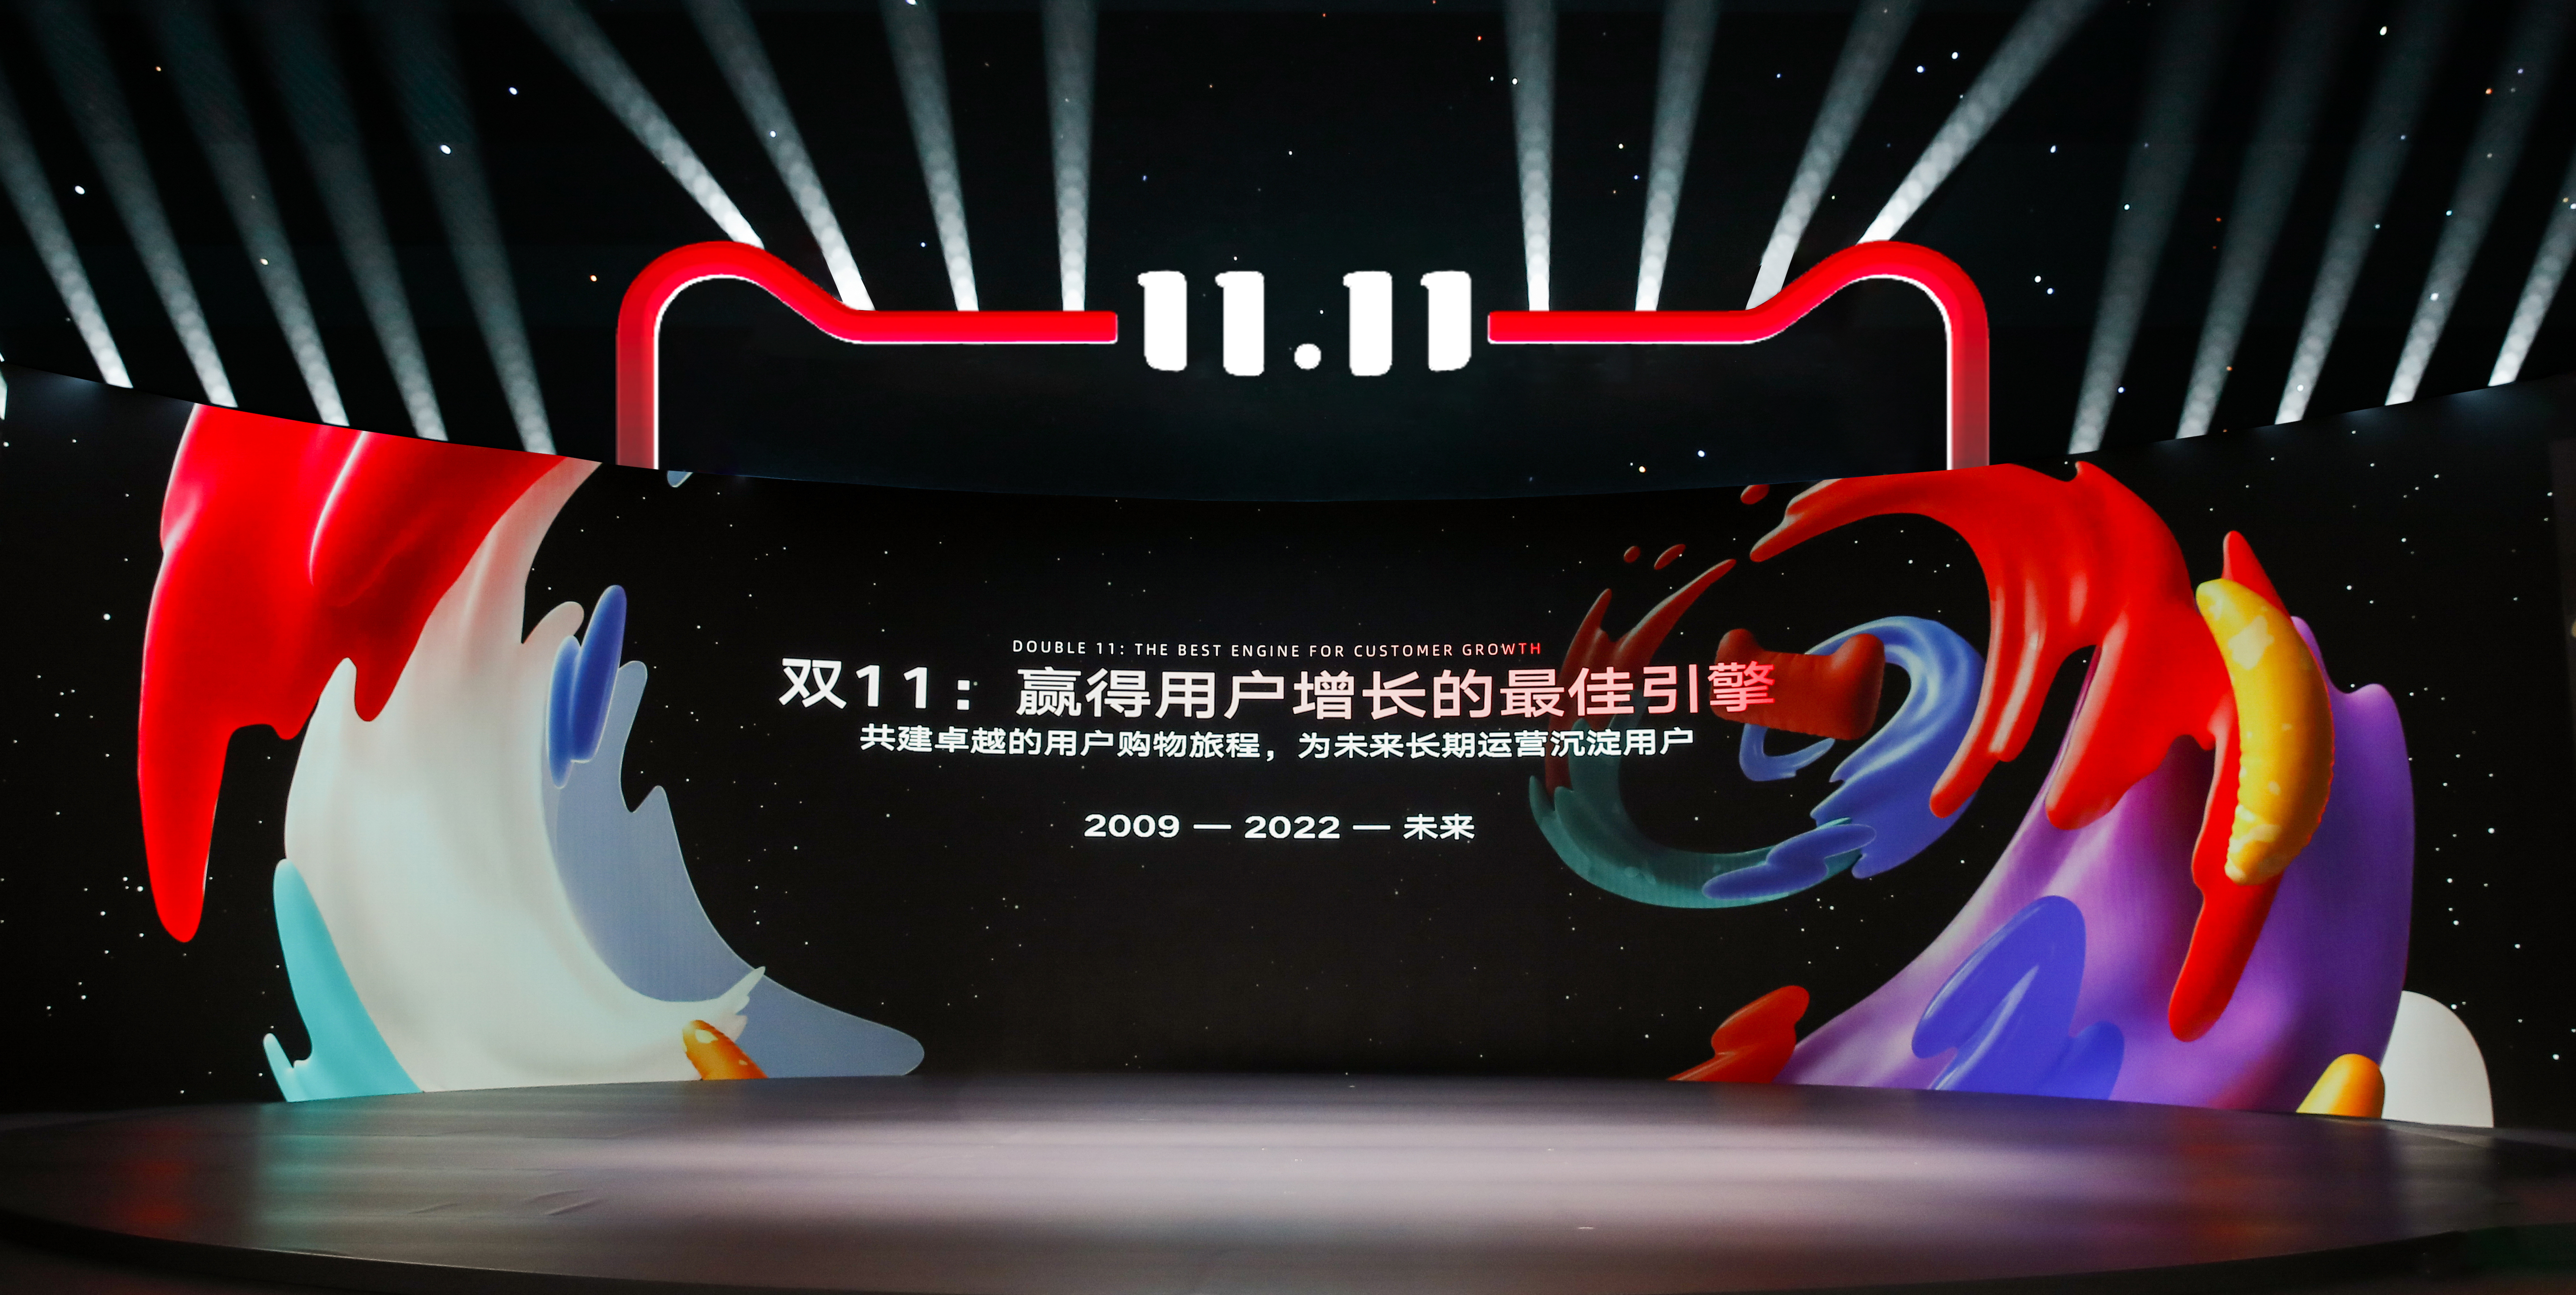 Alibaba's 11.11 Global Shopping Festival is the most powerful engine for merchants’ customer growth every year.jpg